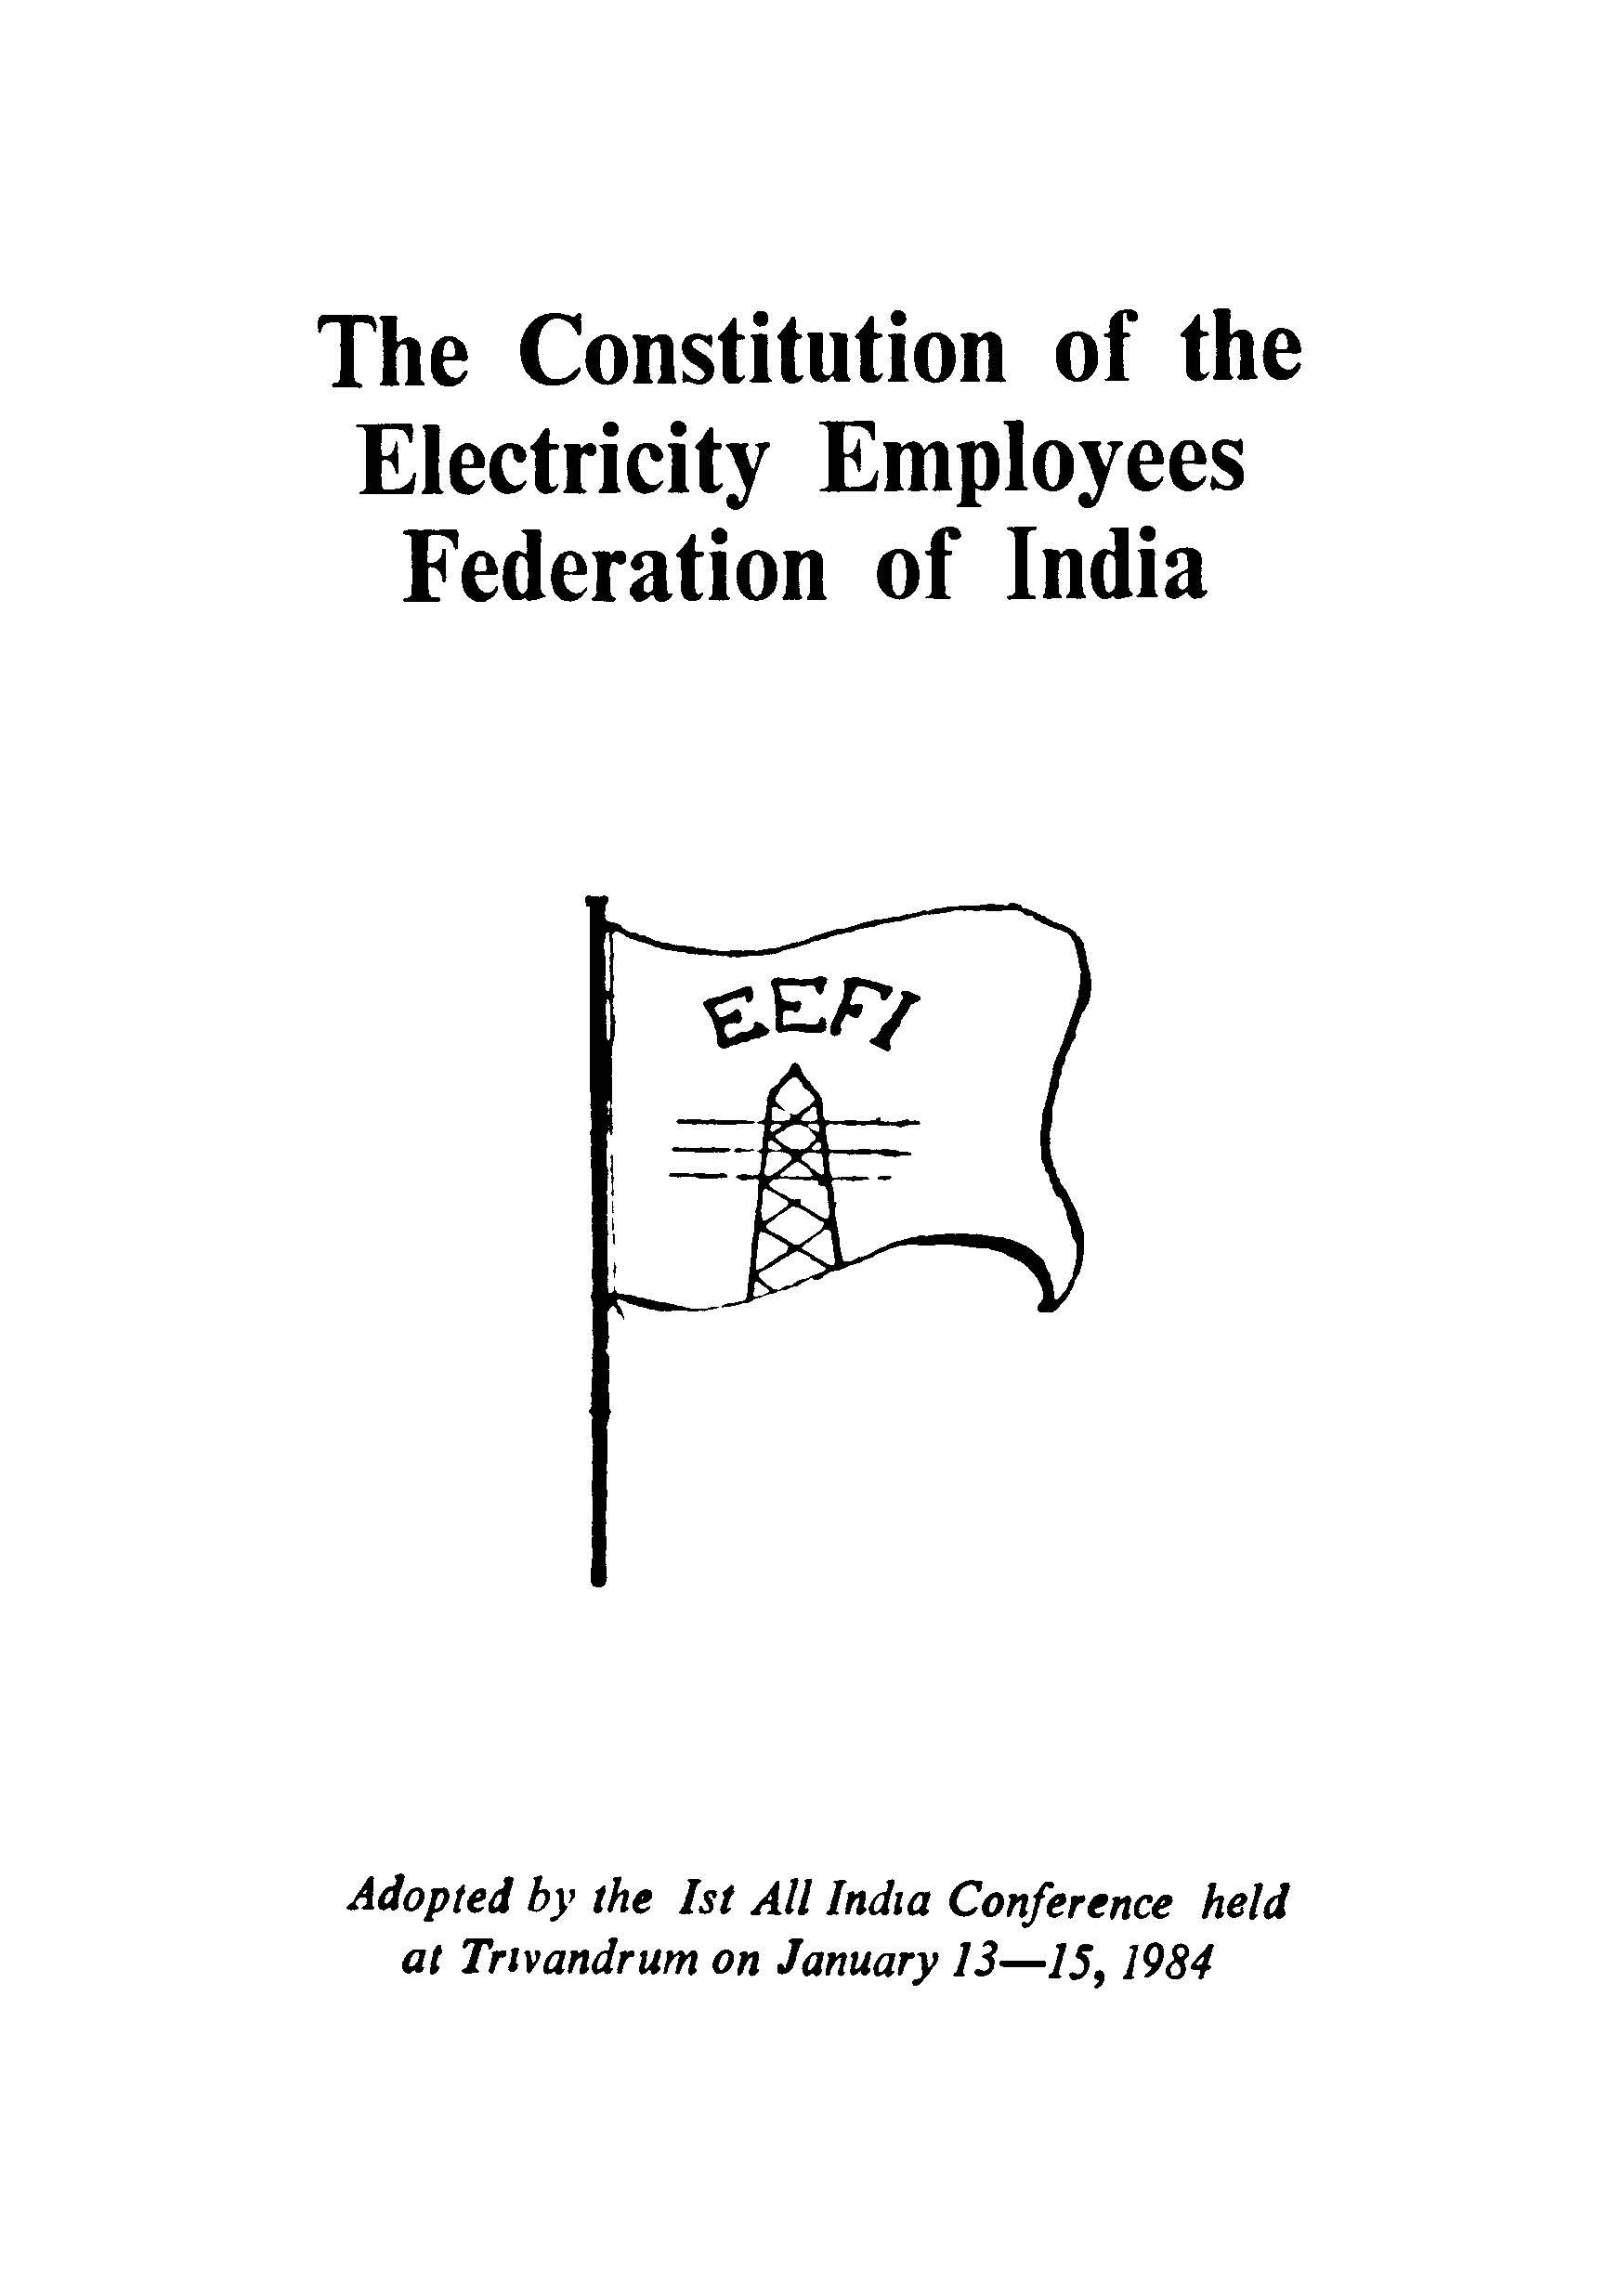 The Constitution of the Eelctricity Employees Federation of India